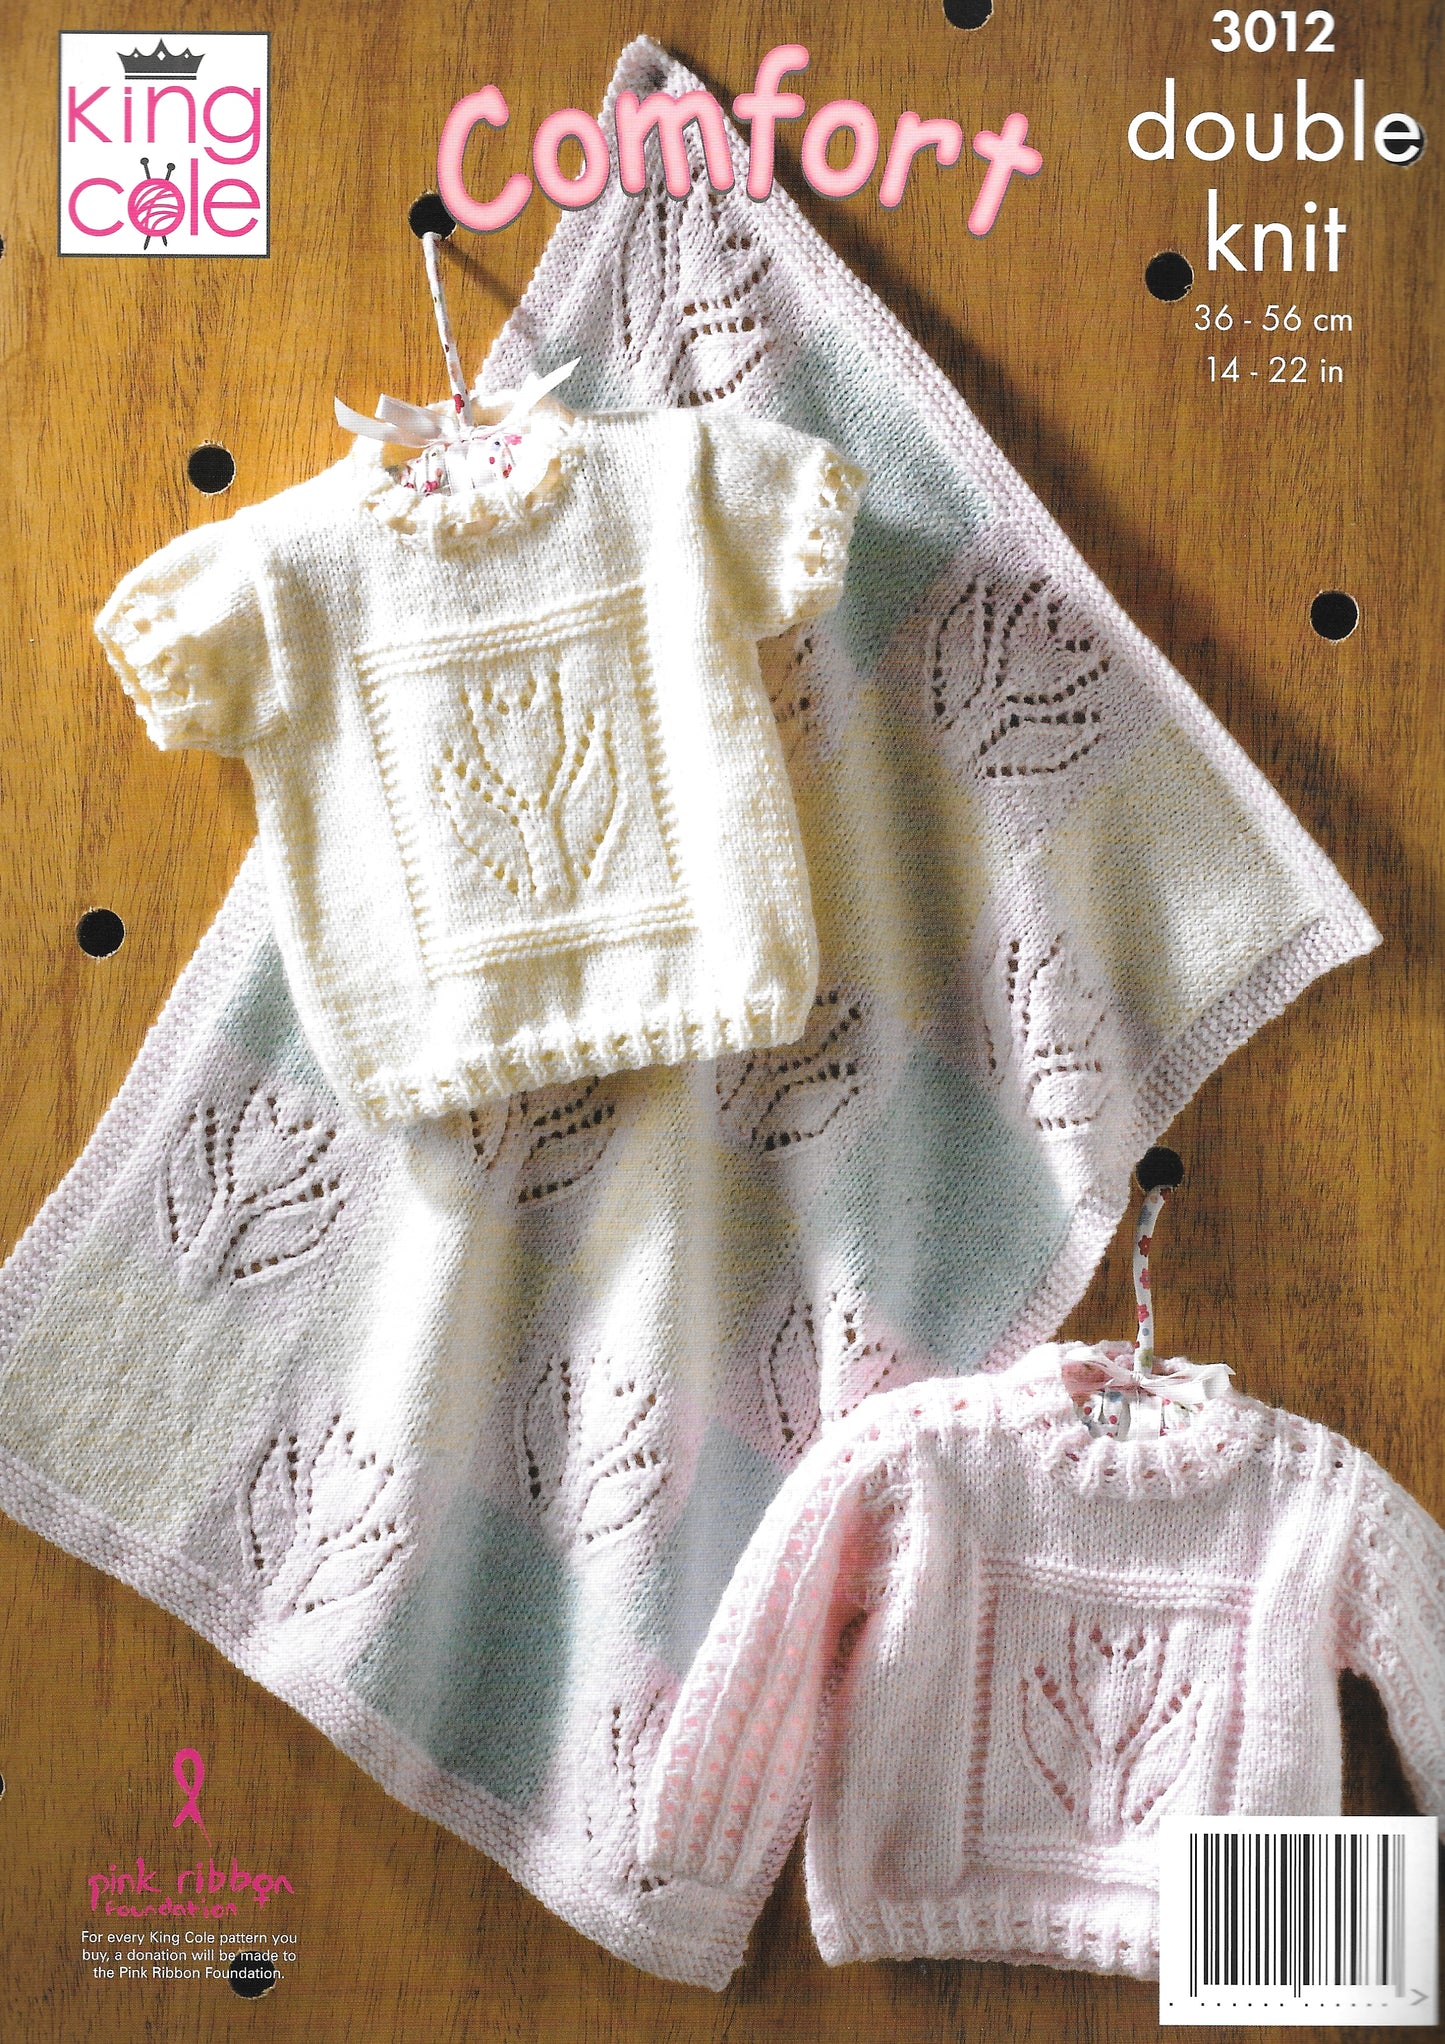 3012 King Cole Knitting Pattern. Child's sweaters/blanket. Double Knit